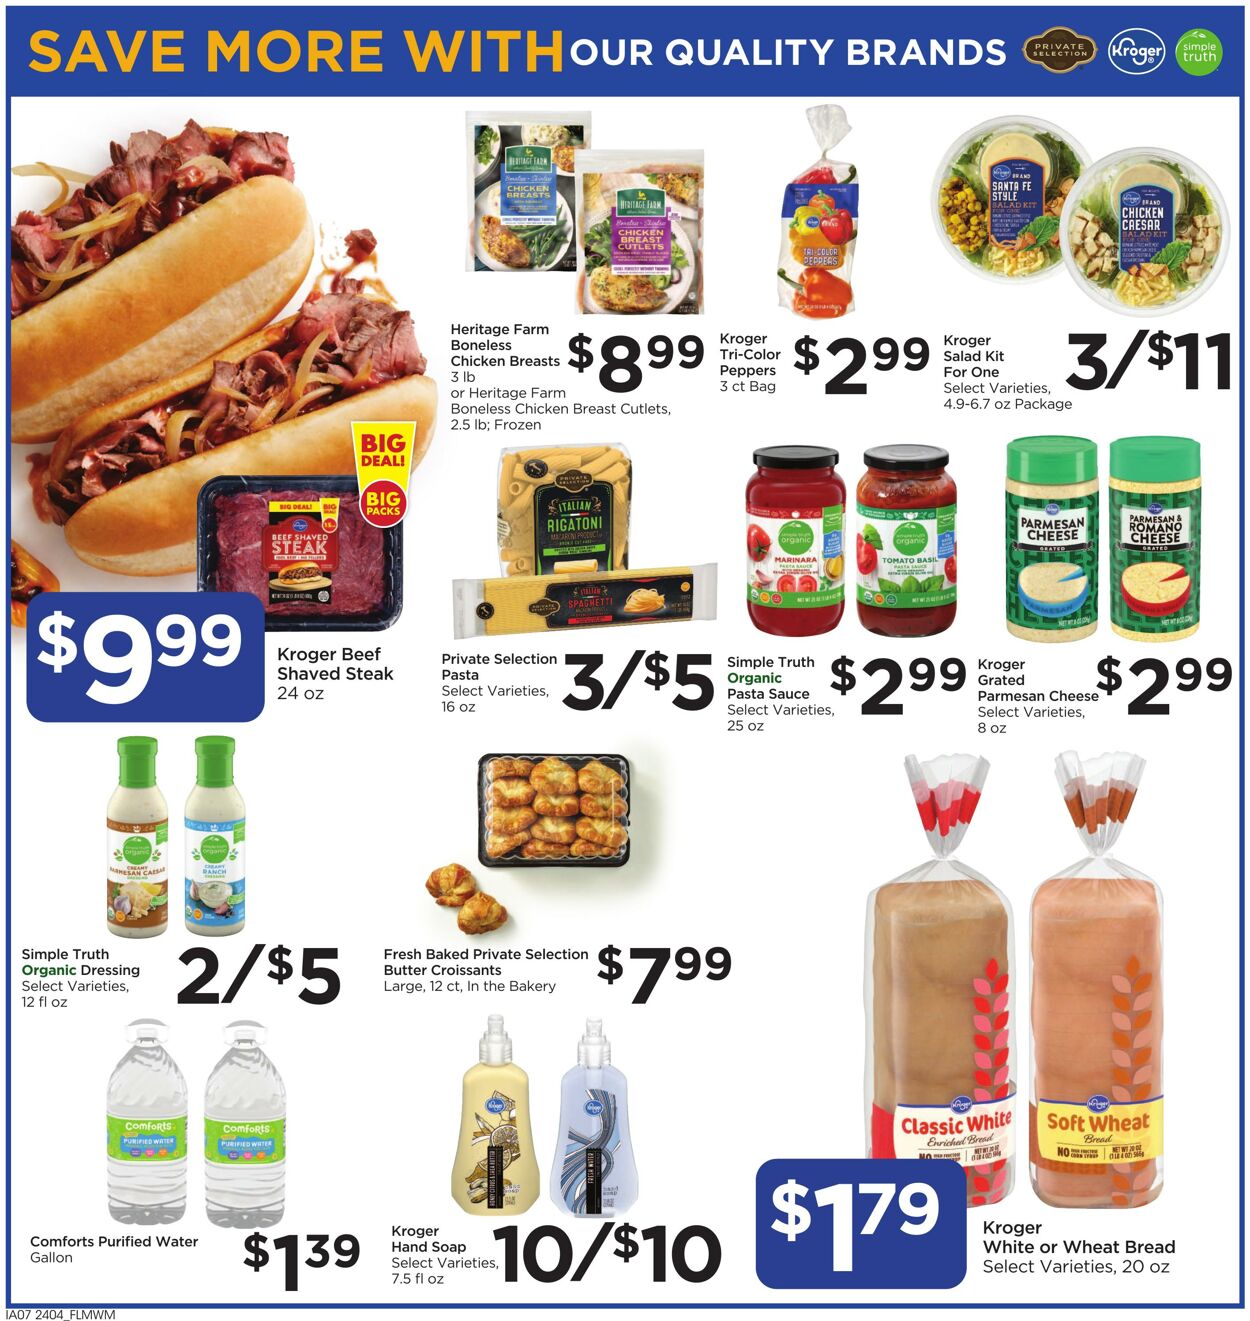 Catalogue Food 4 Less from 02/28/2024